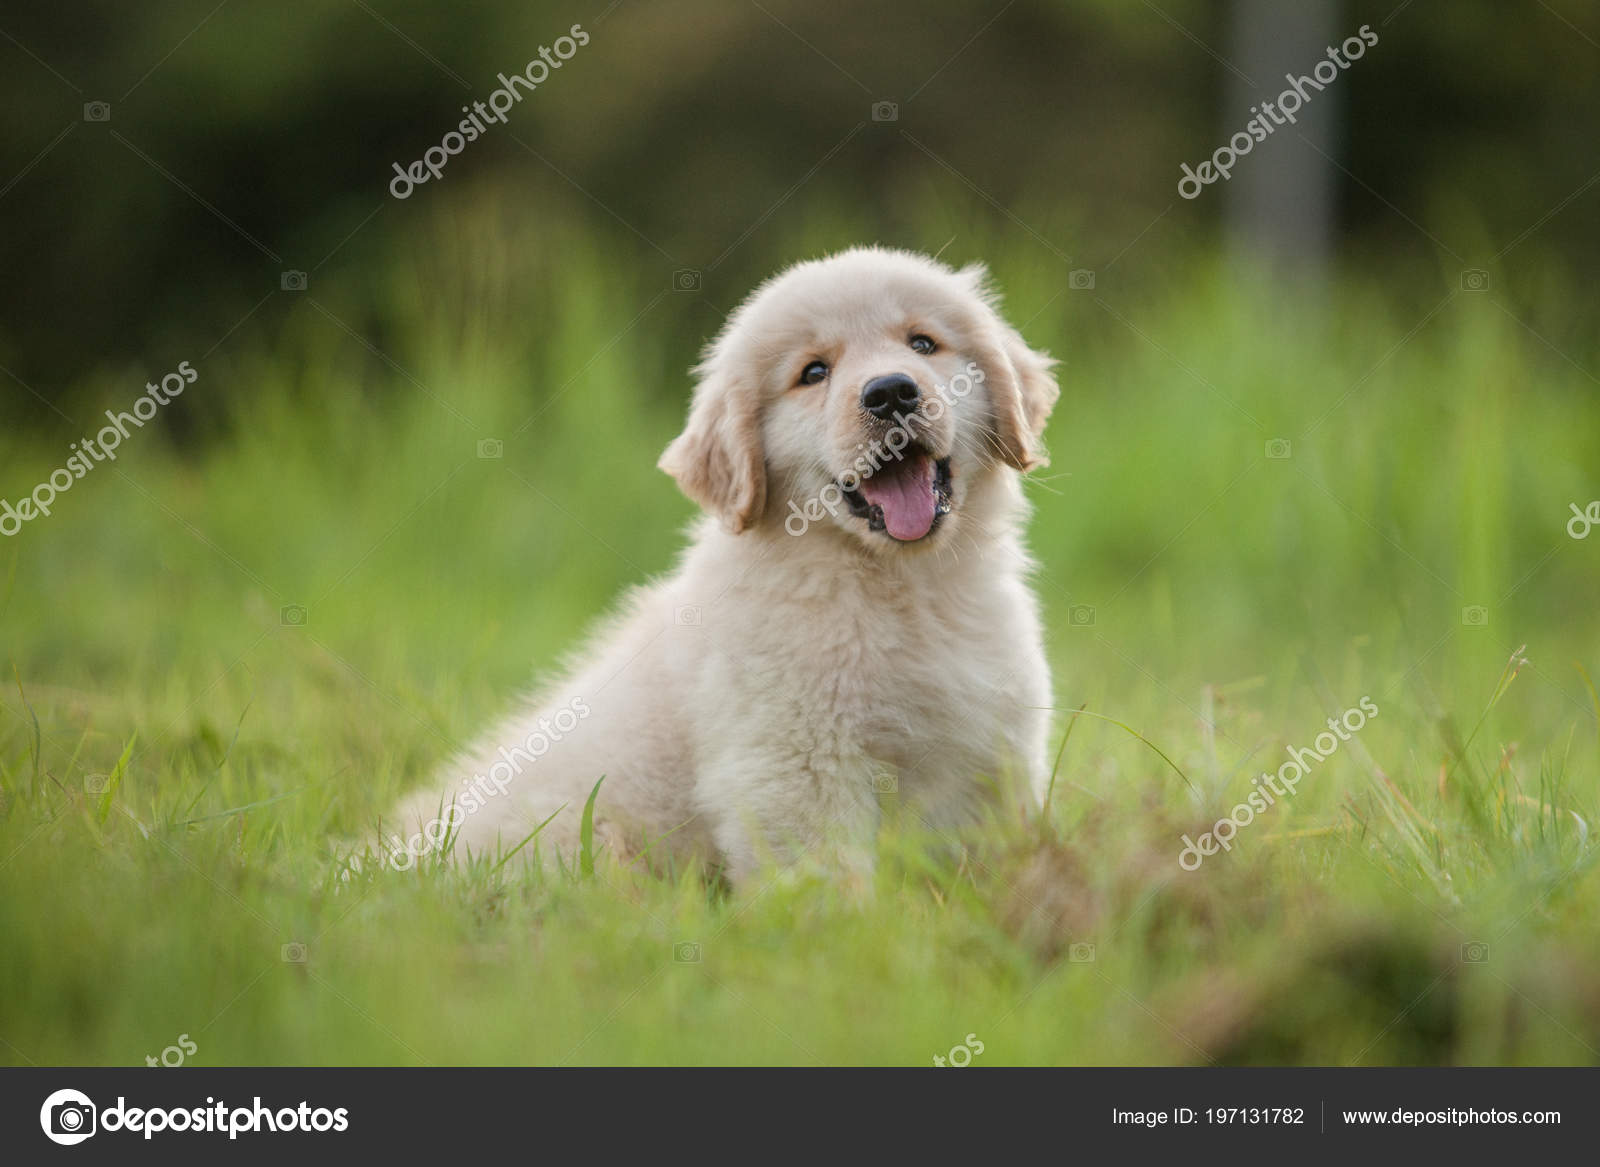 Baby Golden Retriever Puppy Grass Home Stock Photo Image By C Aradaphotography 197131782